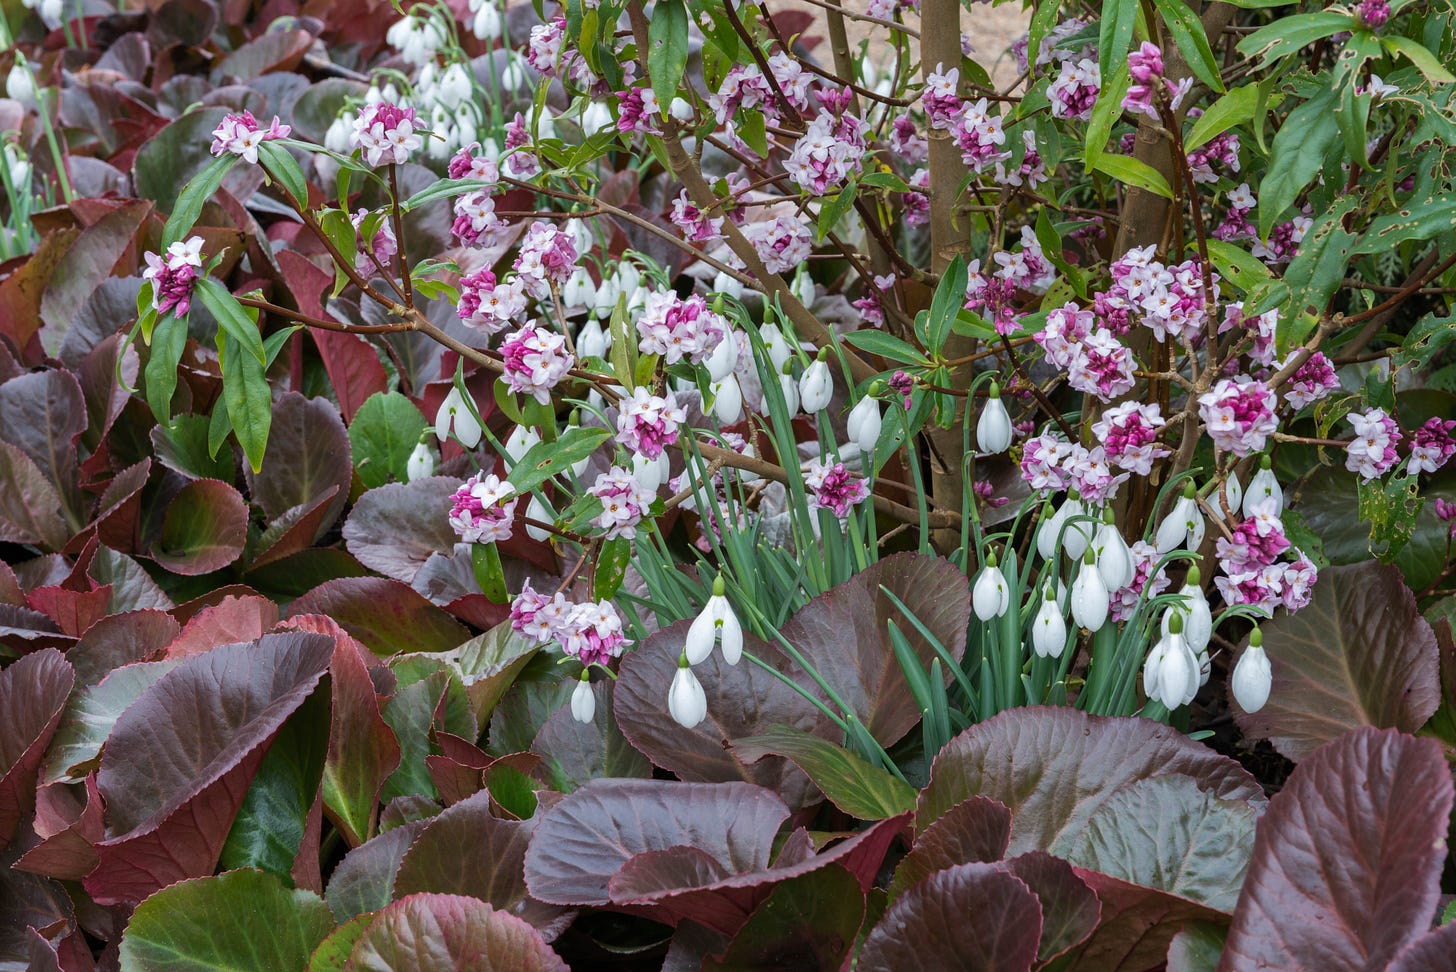 plants with purple leaves and pink and white flowers